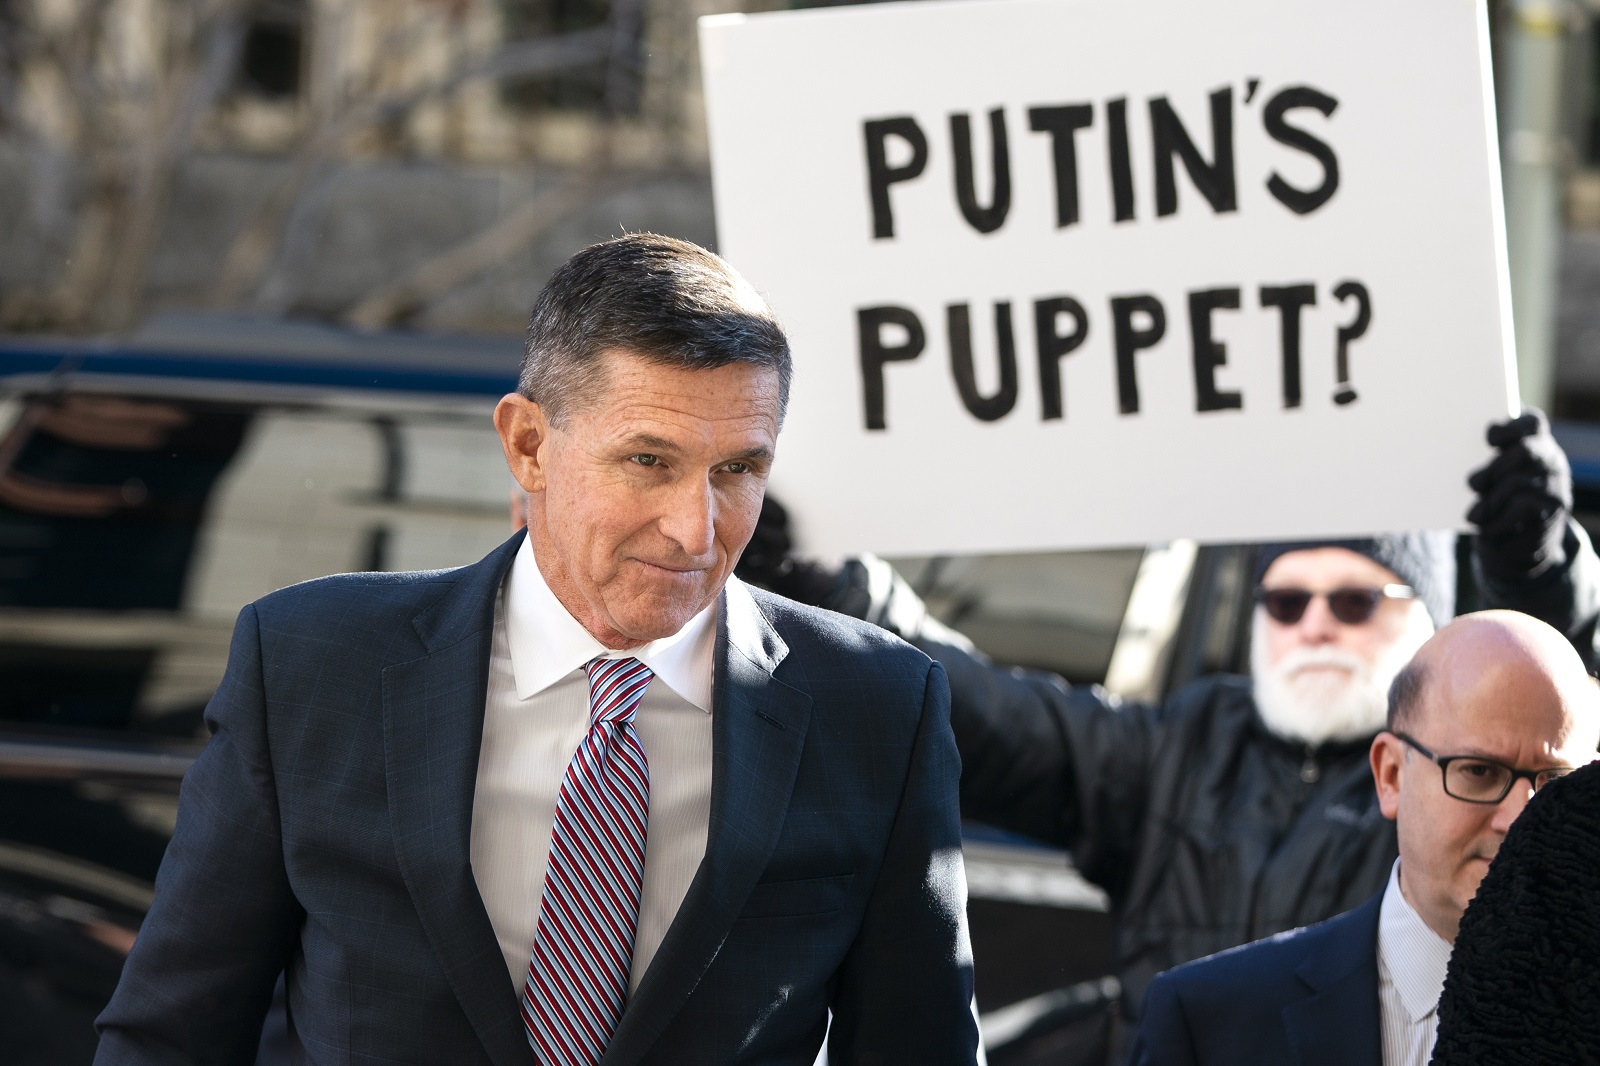 epa08842388 (FILE) - Former National Security Advisor Michael Flynn arrives for his sentencing hearing for lying to the FBI at the US Federal Court in Washington, DC, USA, 18 December 2018 (Reissued 25 November 2020). US President Donald J. Trump tweeted on 25 November that he has given a full pardon to his former national security adviser, Lieutenant General Michael Flynn.  EPA/JIM LO SCALZO *** Local Caption *** 54850028